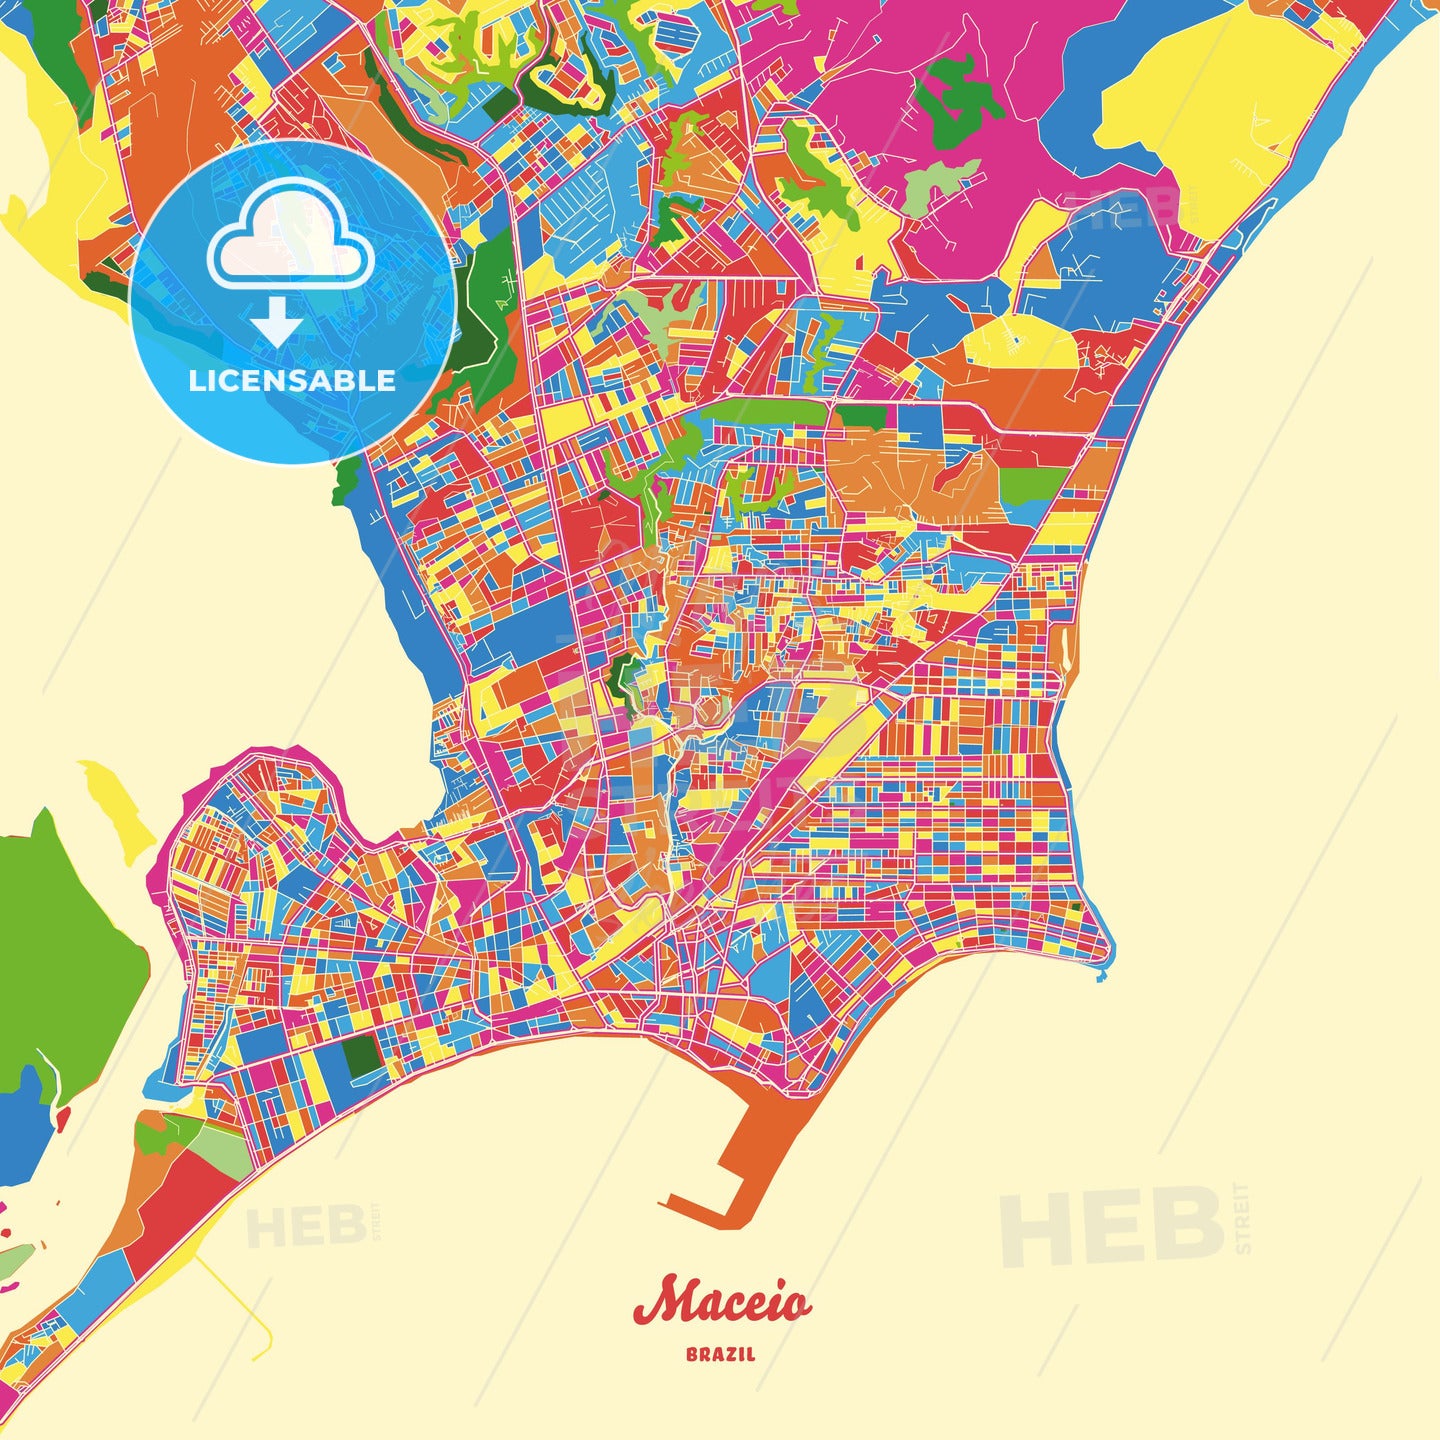 Maceio, Brazil Crazy Colorful Street Map Poster Template - HEBSTREITS Sketches